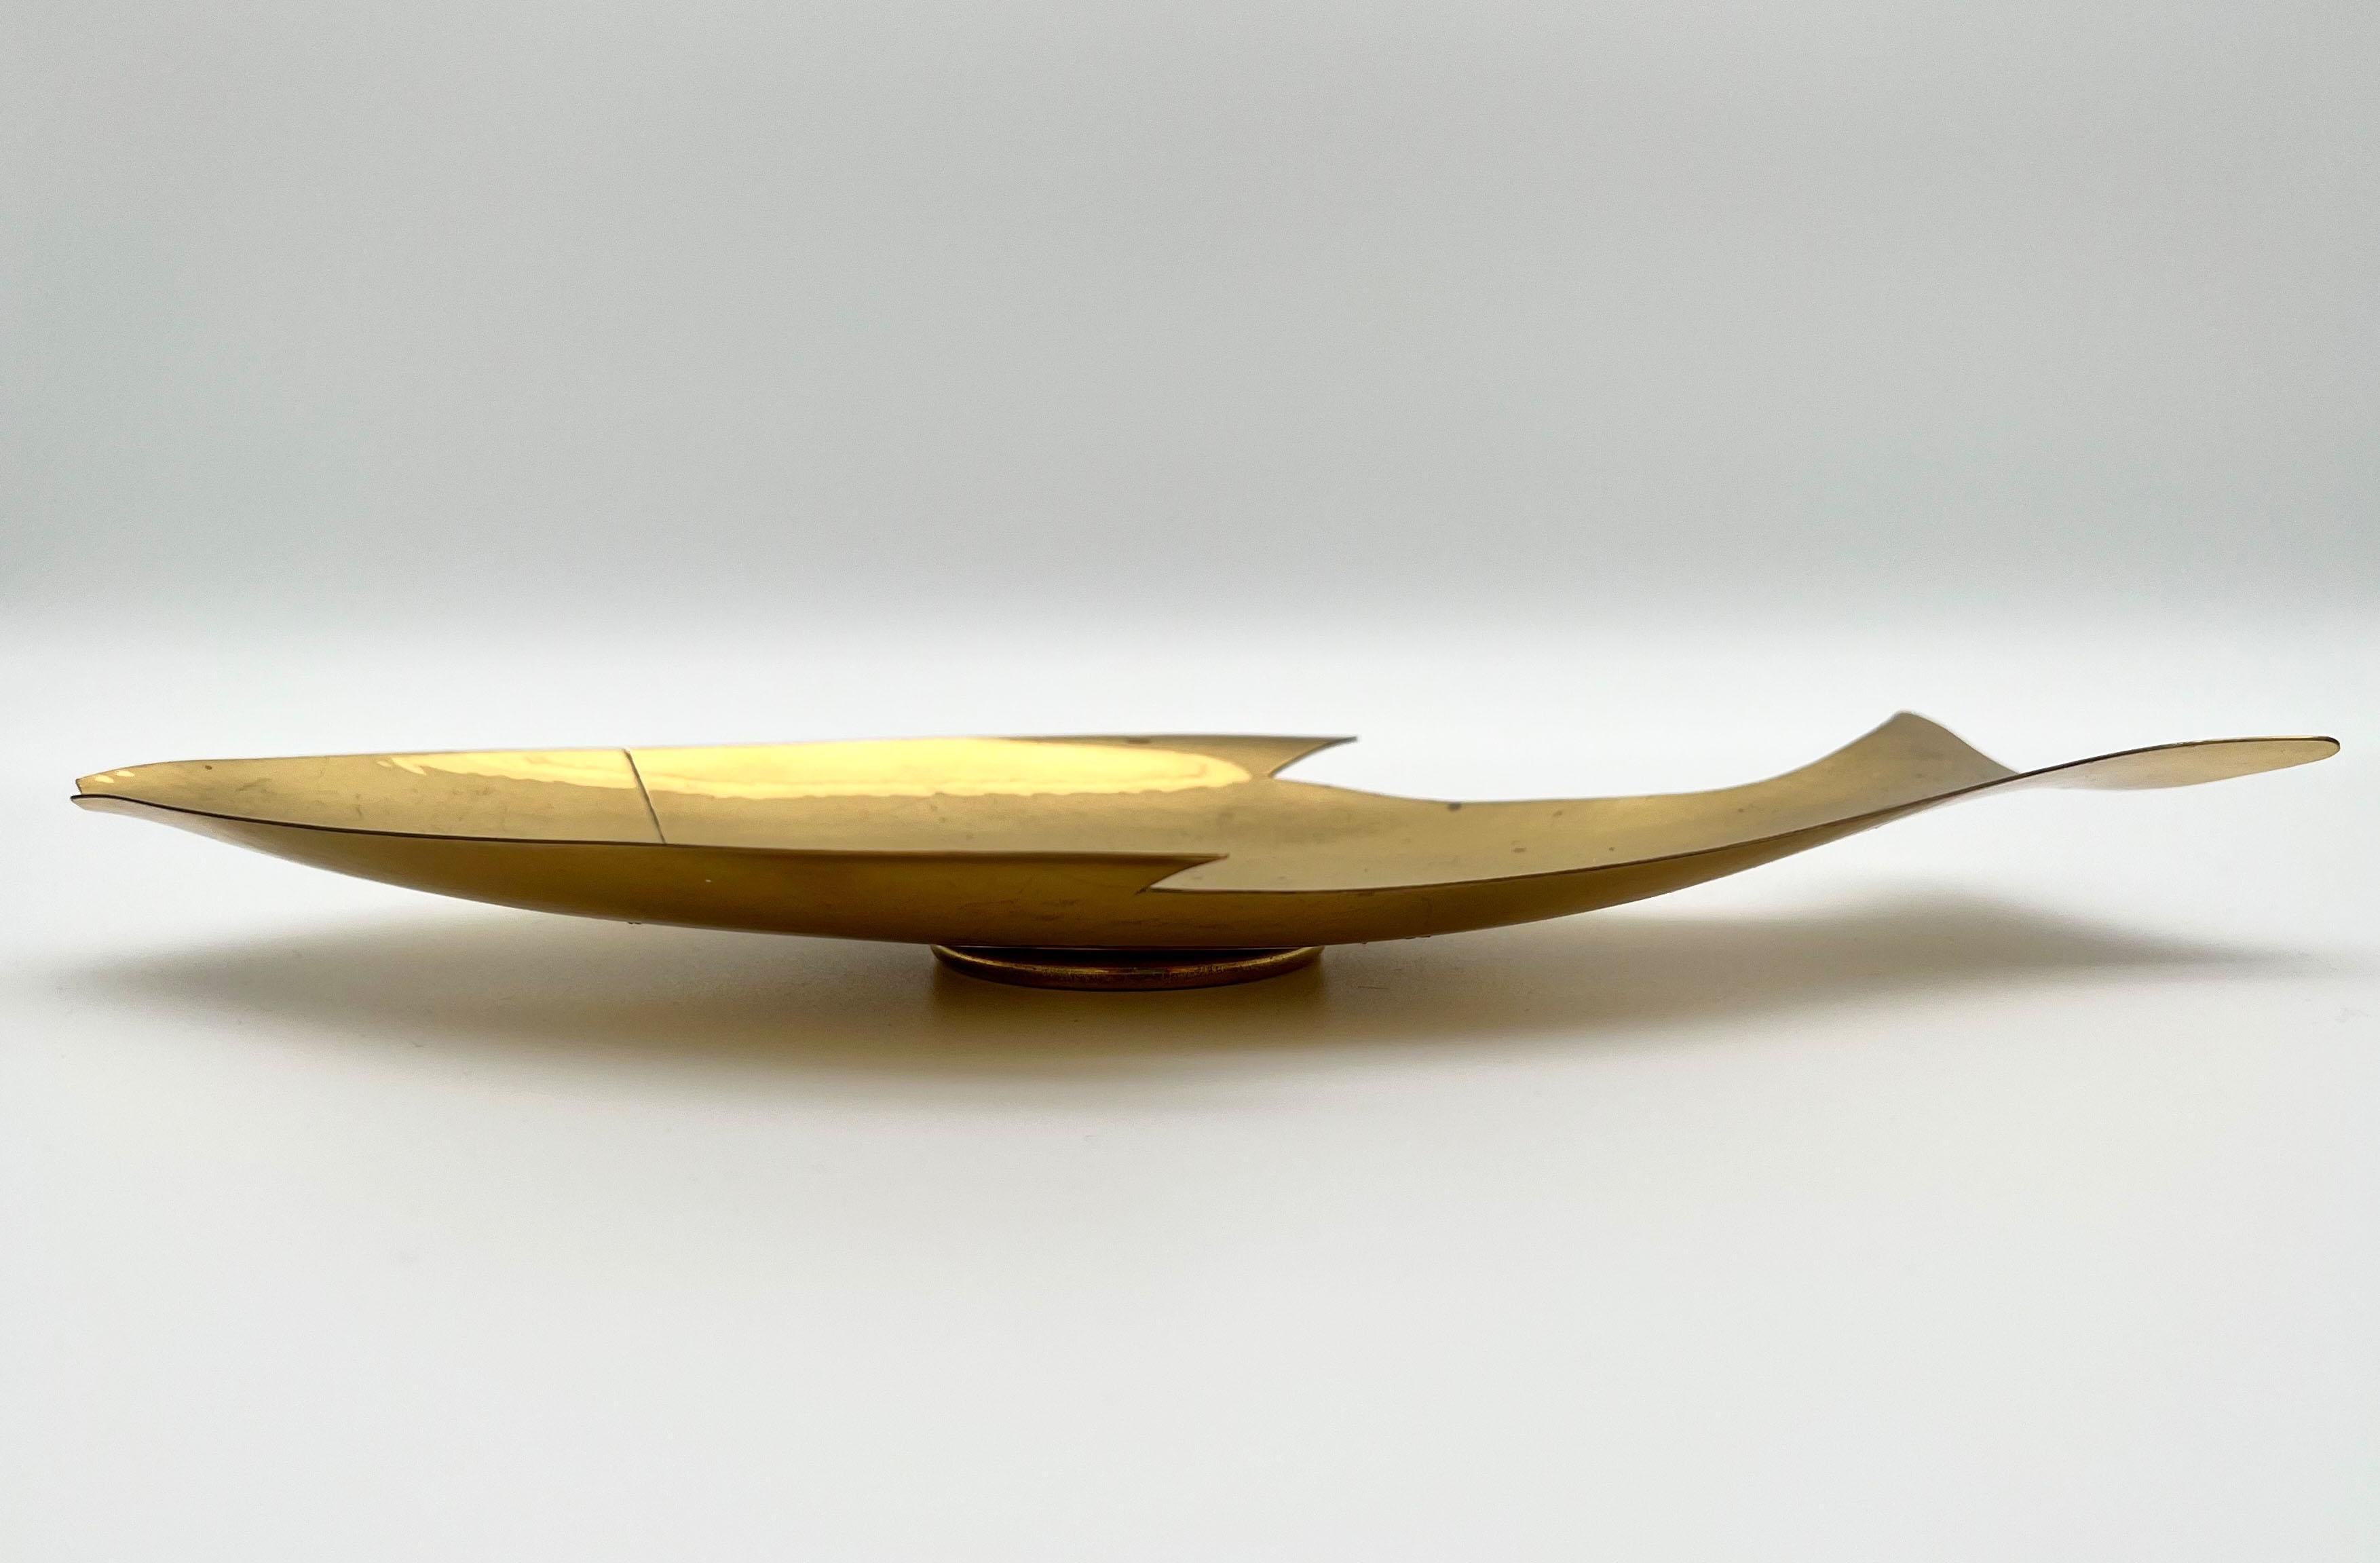 20th Century Brass Fish Bowl by Richard Rohac, Signed, Handmade in Austria, 1950s For Sale